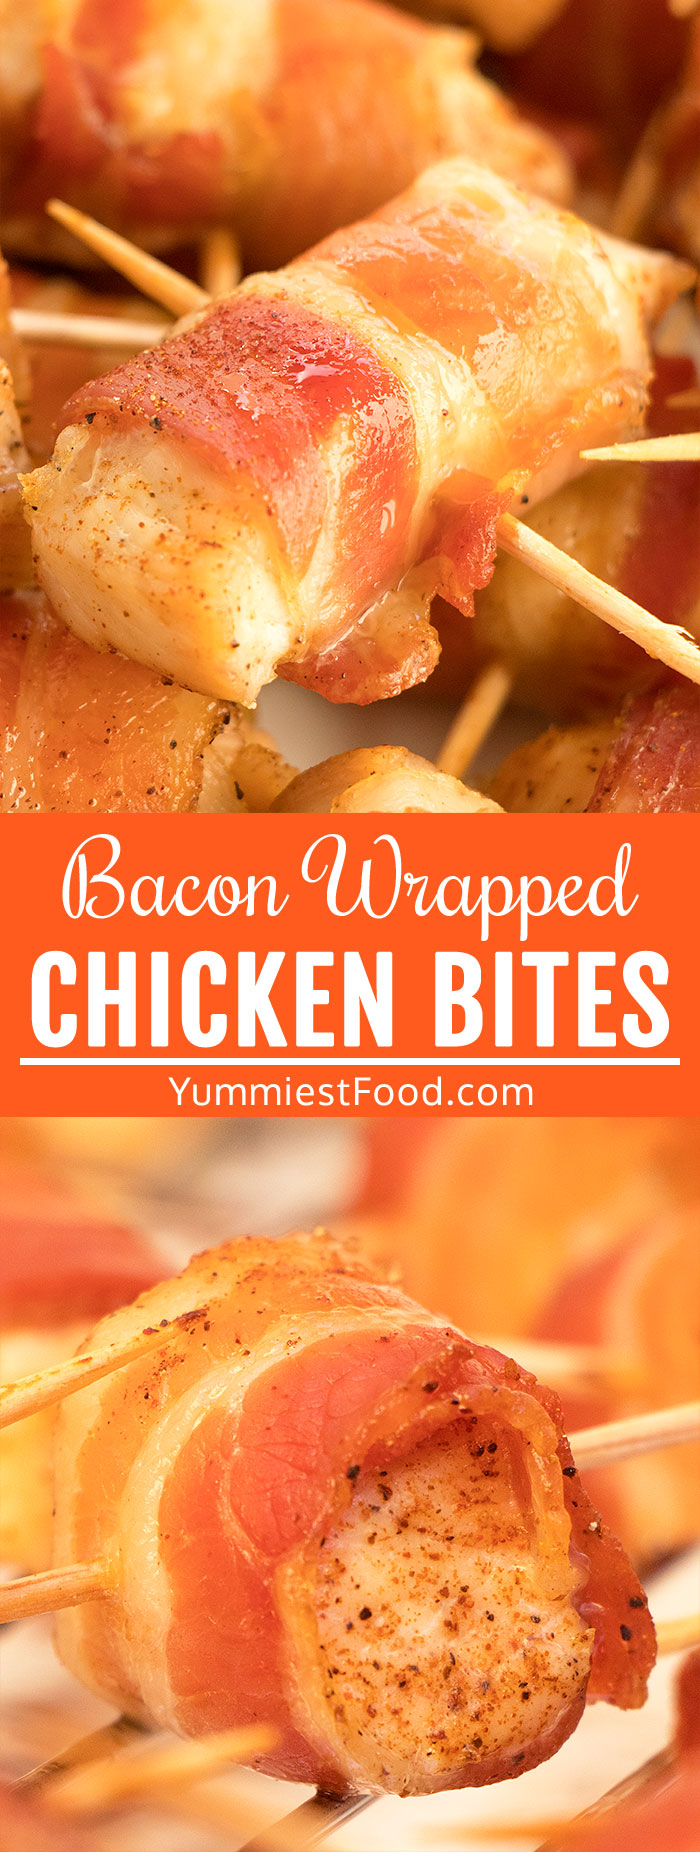 Brown Sugar Baked Bacon Wrapped Chicken Breasts are perfectly easy and absolutely “must” finger-food appetizer for the game day, gatherings or parties, or quick delicious dinner! Add the basil and honey to the coating of these spiced chicken breasts wrapped in bacon, and fully enjoy these crispy bites! #gameday #gamedayfood #gamedayrecipes #gamedayappetizers #superbowlrecipes #appetizers #dinner #easydinner #dinnerrecipes #chicken #bacon #chickenbreast #chickenrecipes #baconwrappedchicken